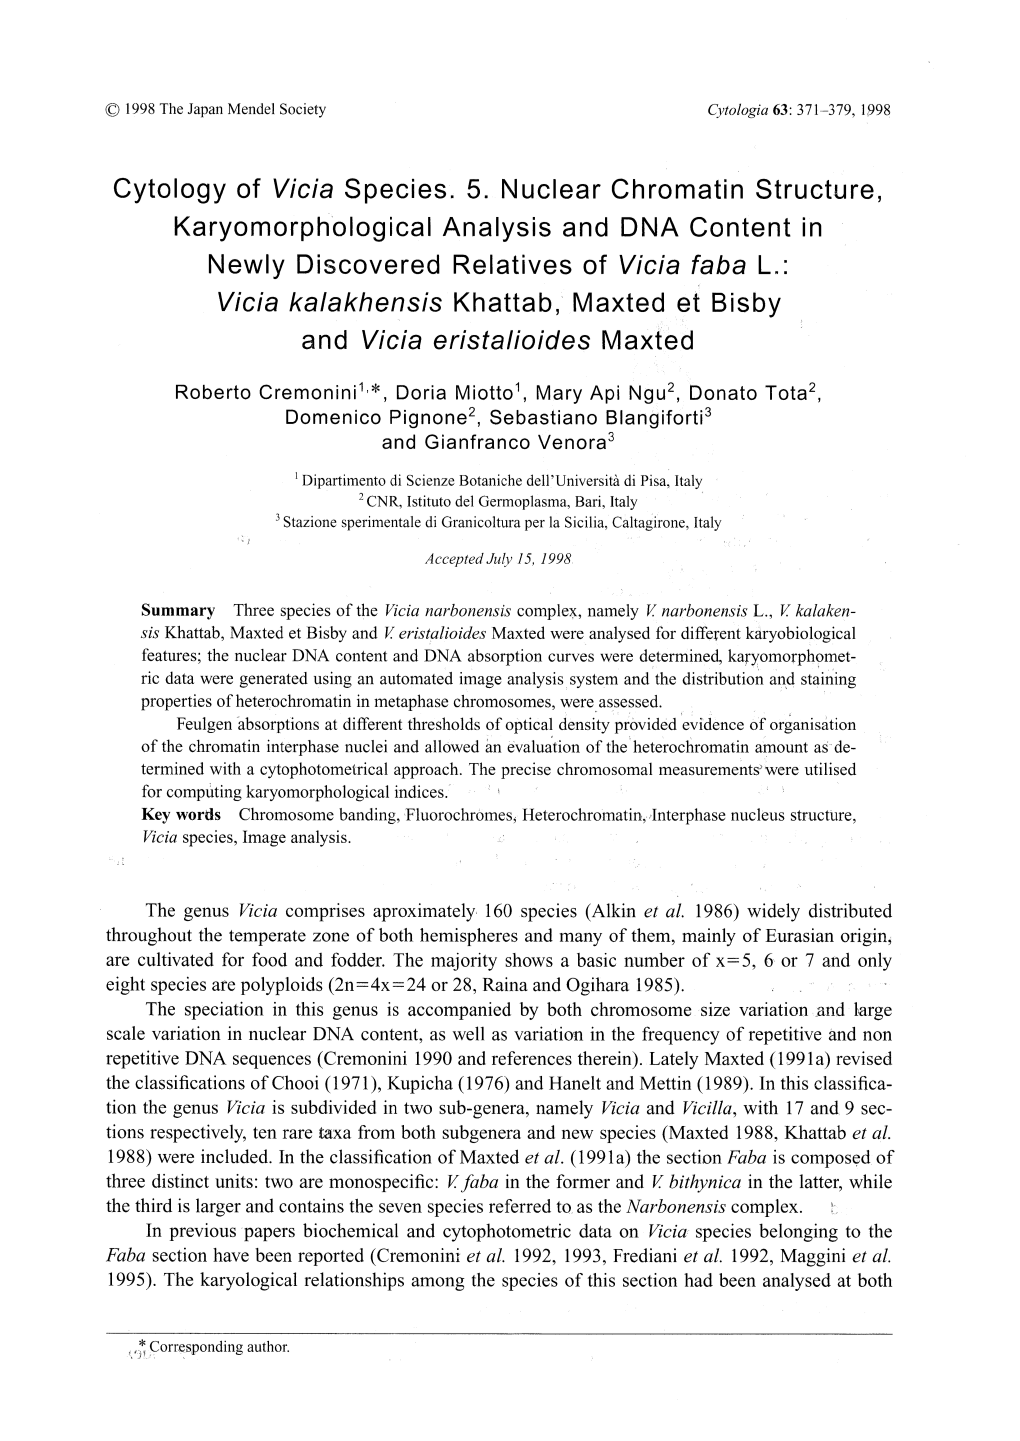 Cytology of Vicia Species. 5. Nuclear Chromatin Structure, Karyomorphological Analysis and DNA Content in Newly Discovered Rela